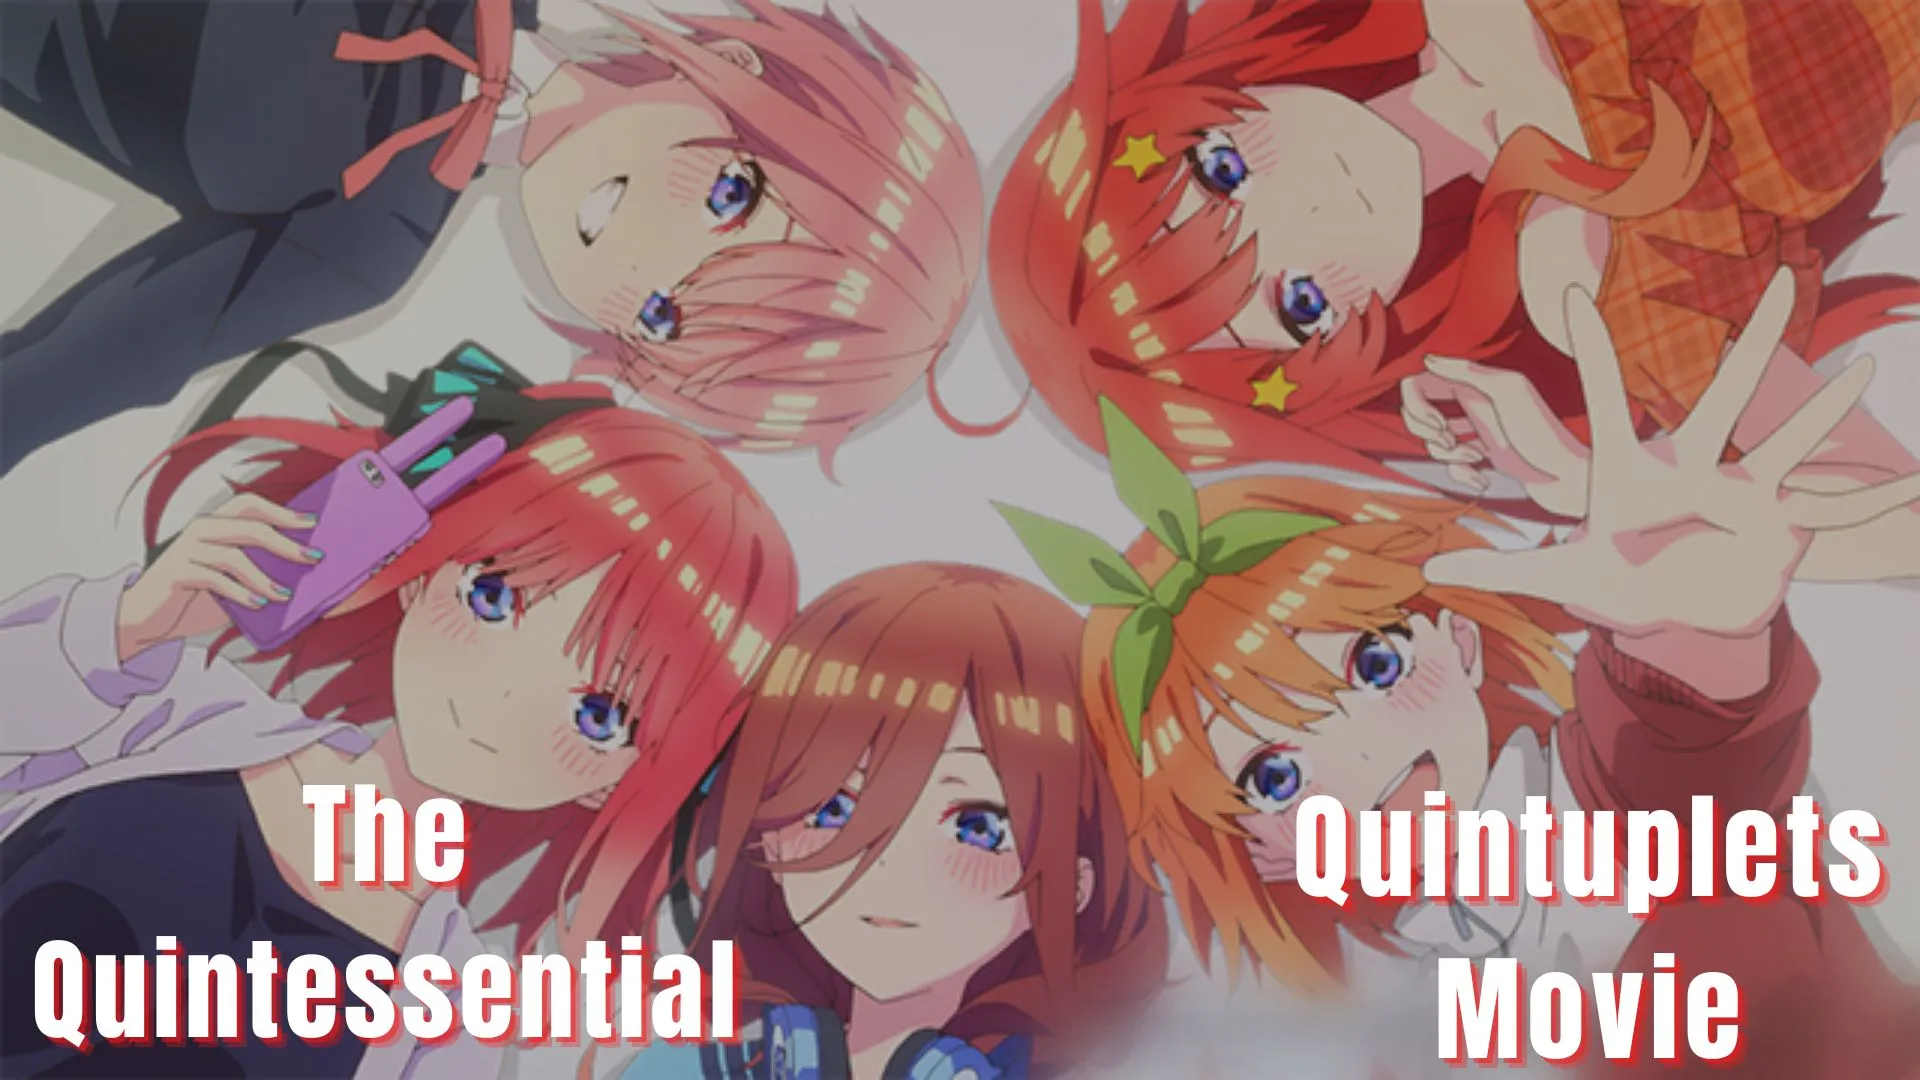 The Quintessential Quintuplets Movie Viewers Will Get After Story